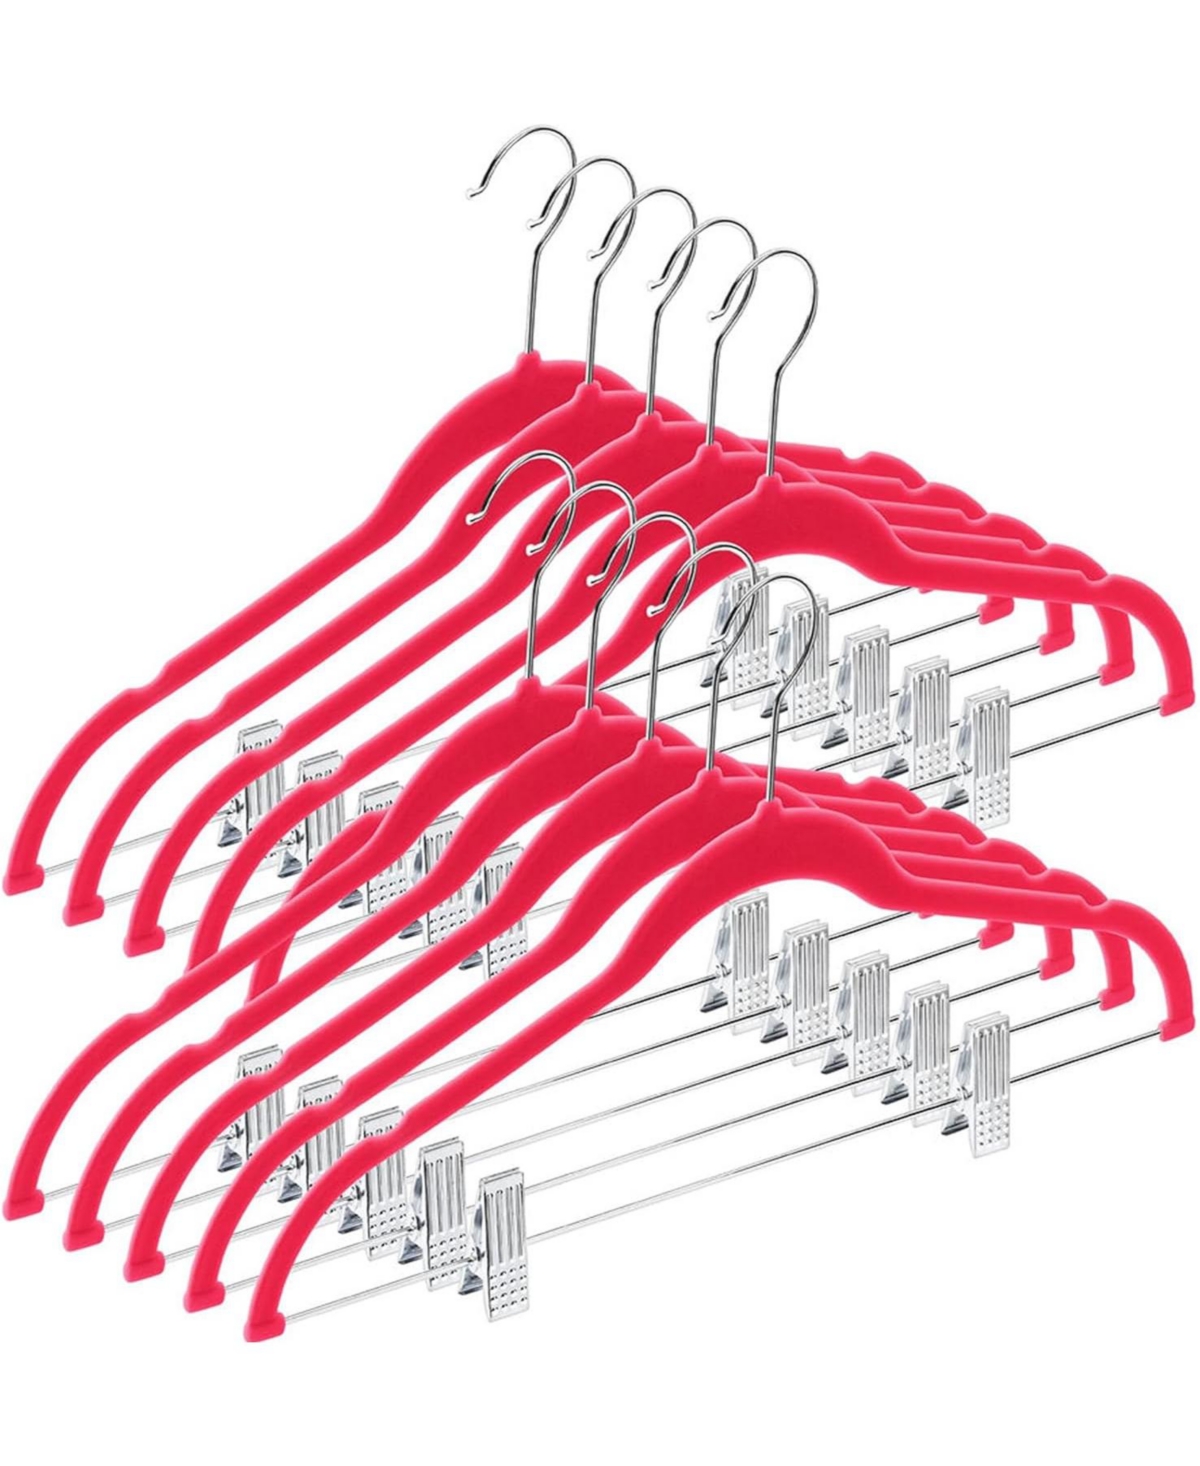 10 Pack Clothes Hangers with Clips in Pink - Ultra Thin No Slip Hangers for Skirts, Pants or Dresses - Pink